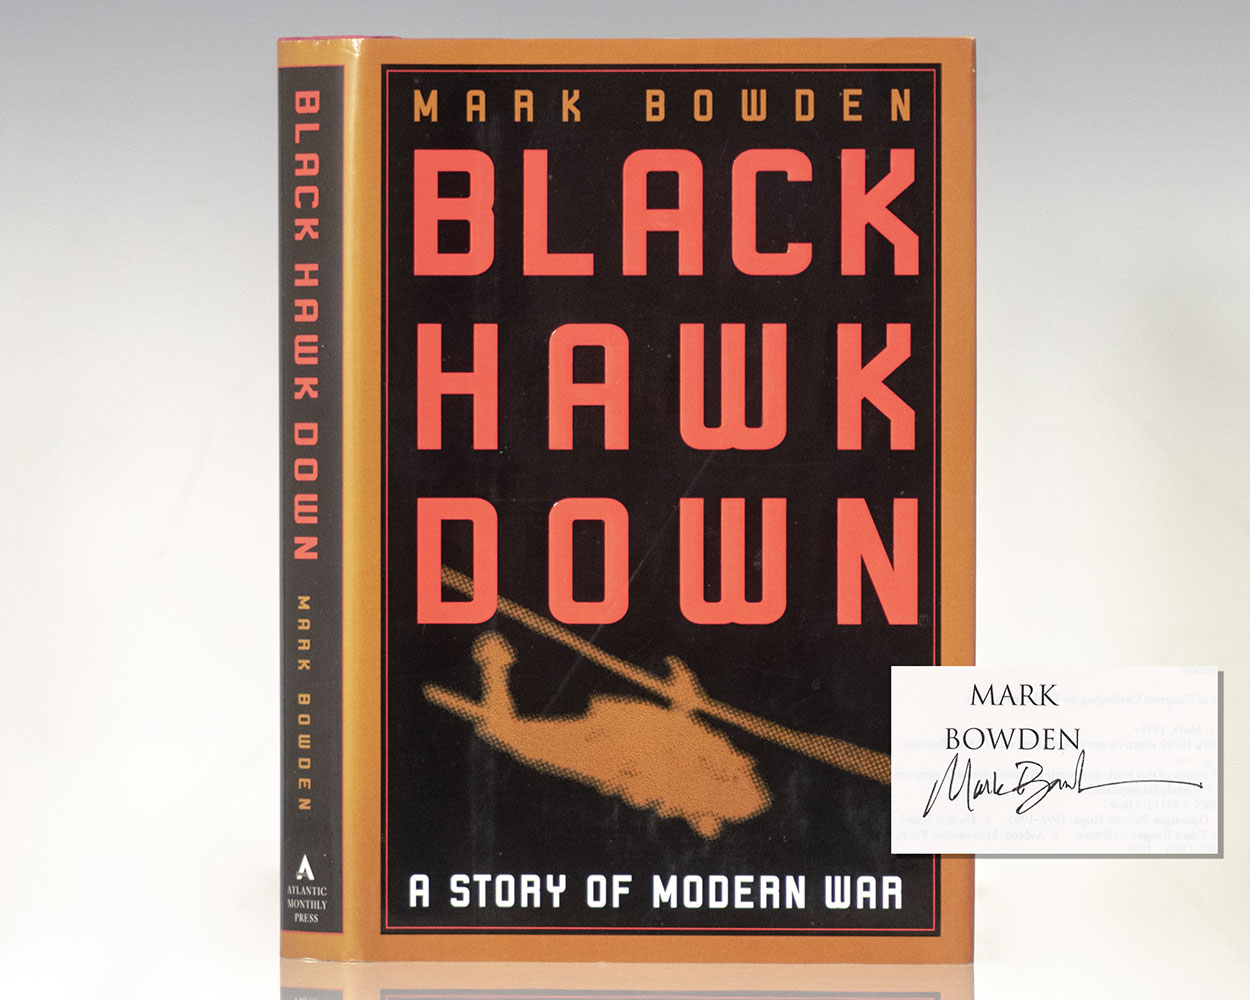 Black Hawk Down: A Story of Modern War. - Raptis Rare Books | Fine Rare and  Antiquarian First Edition Books for Sale